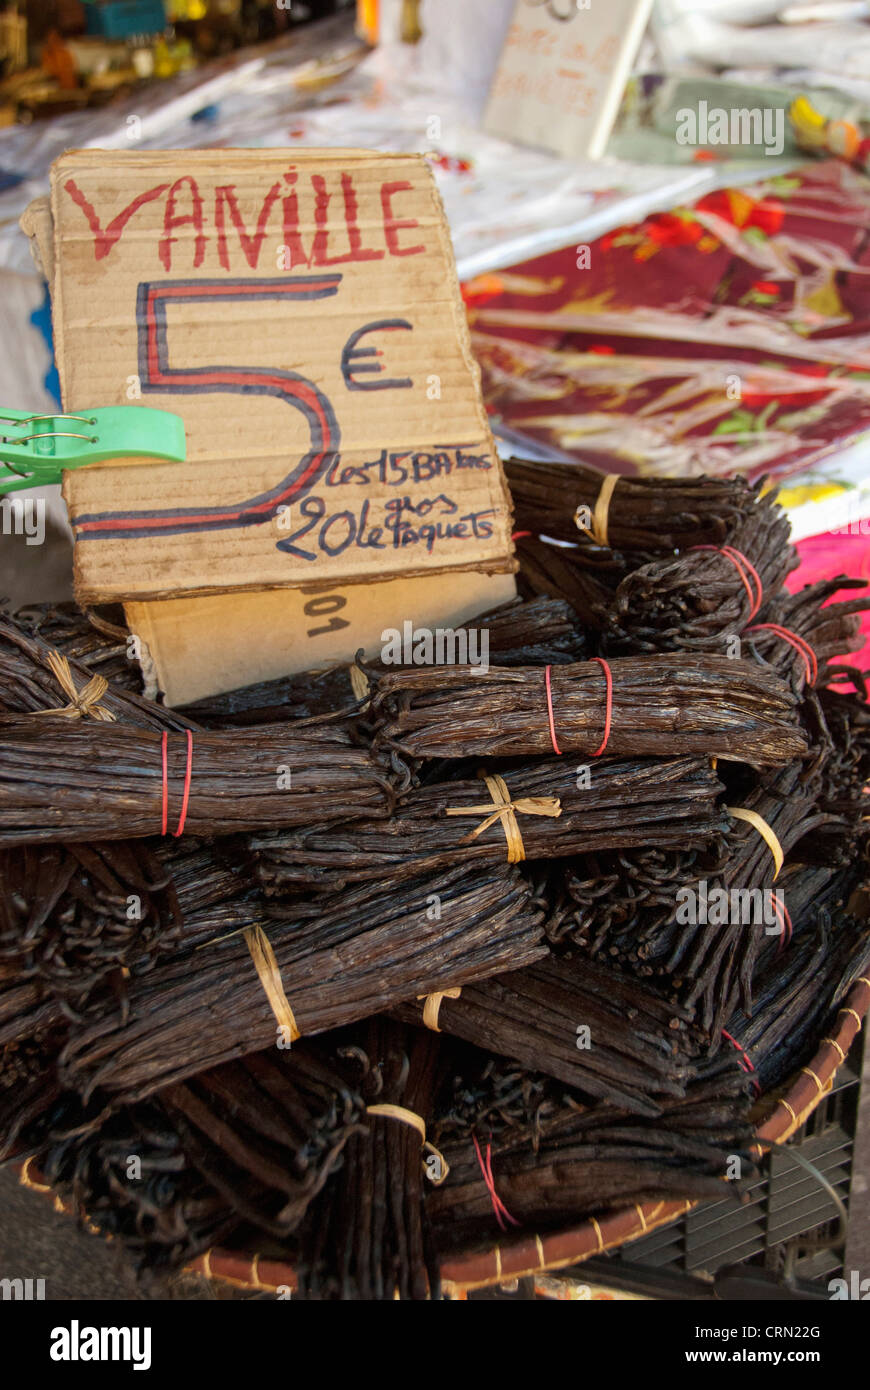 French Overseas territory (aka Francais d'Outre Mer), Reunion Island. St. Pierre, local covered market Fresh island vanilla. Stock Photo